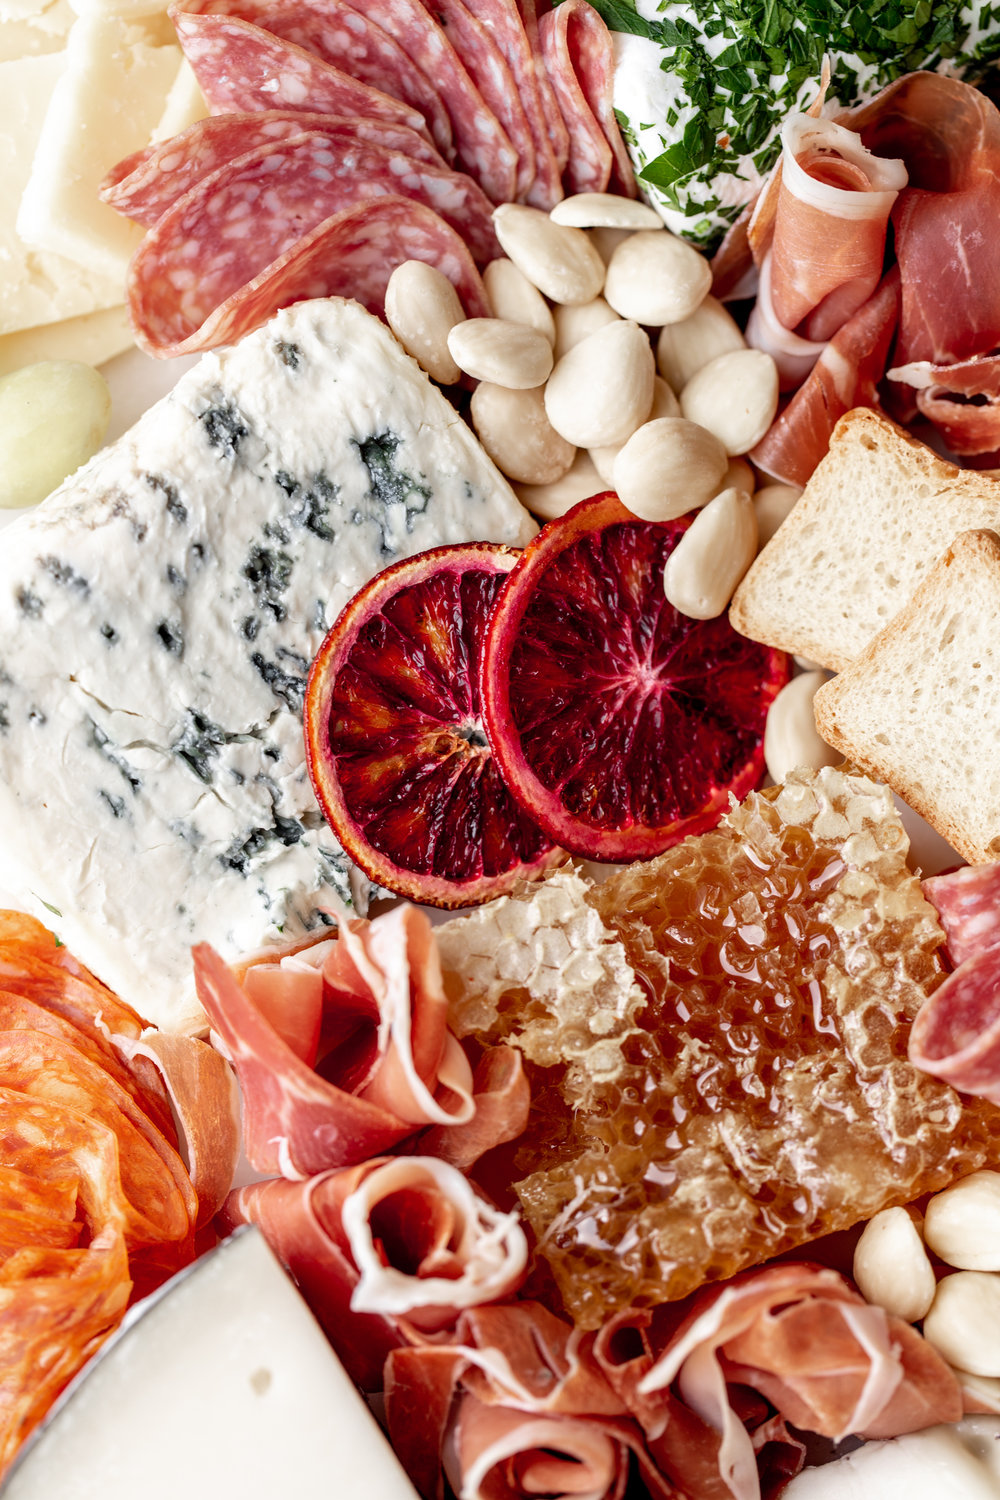 How to put together a cheese and charcuterie board saint agur blue cheese